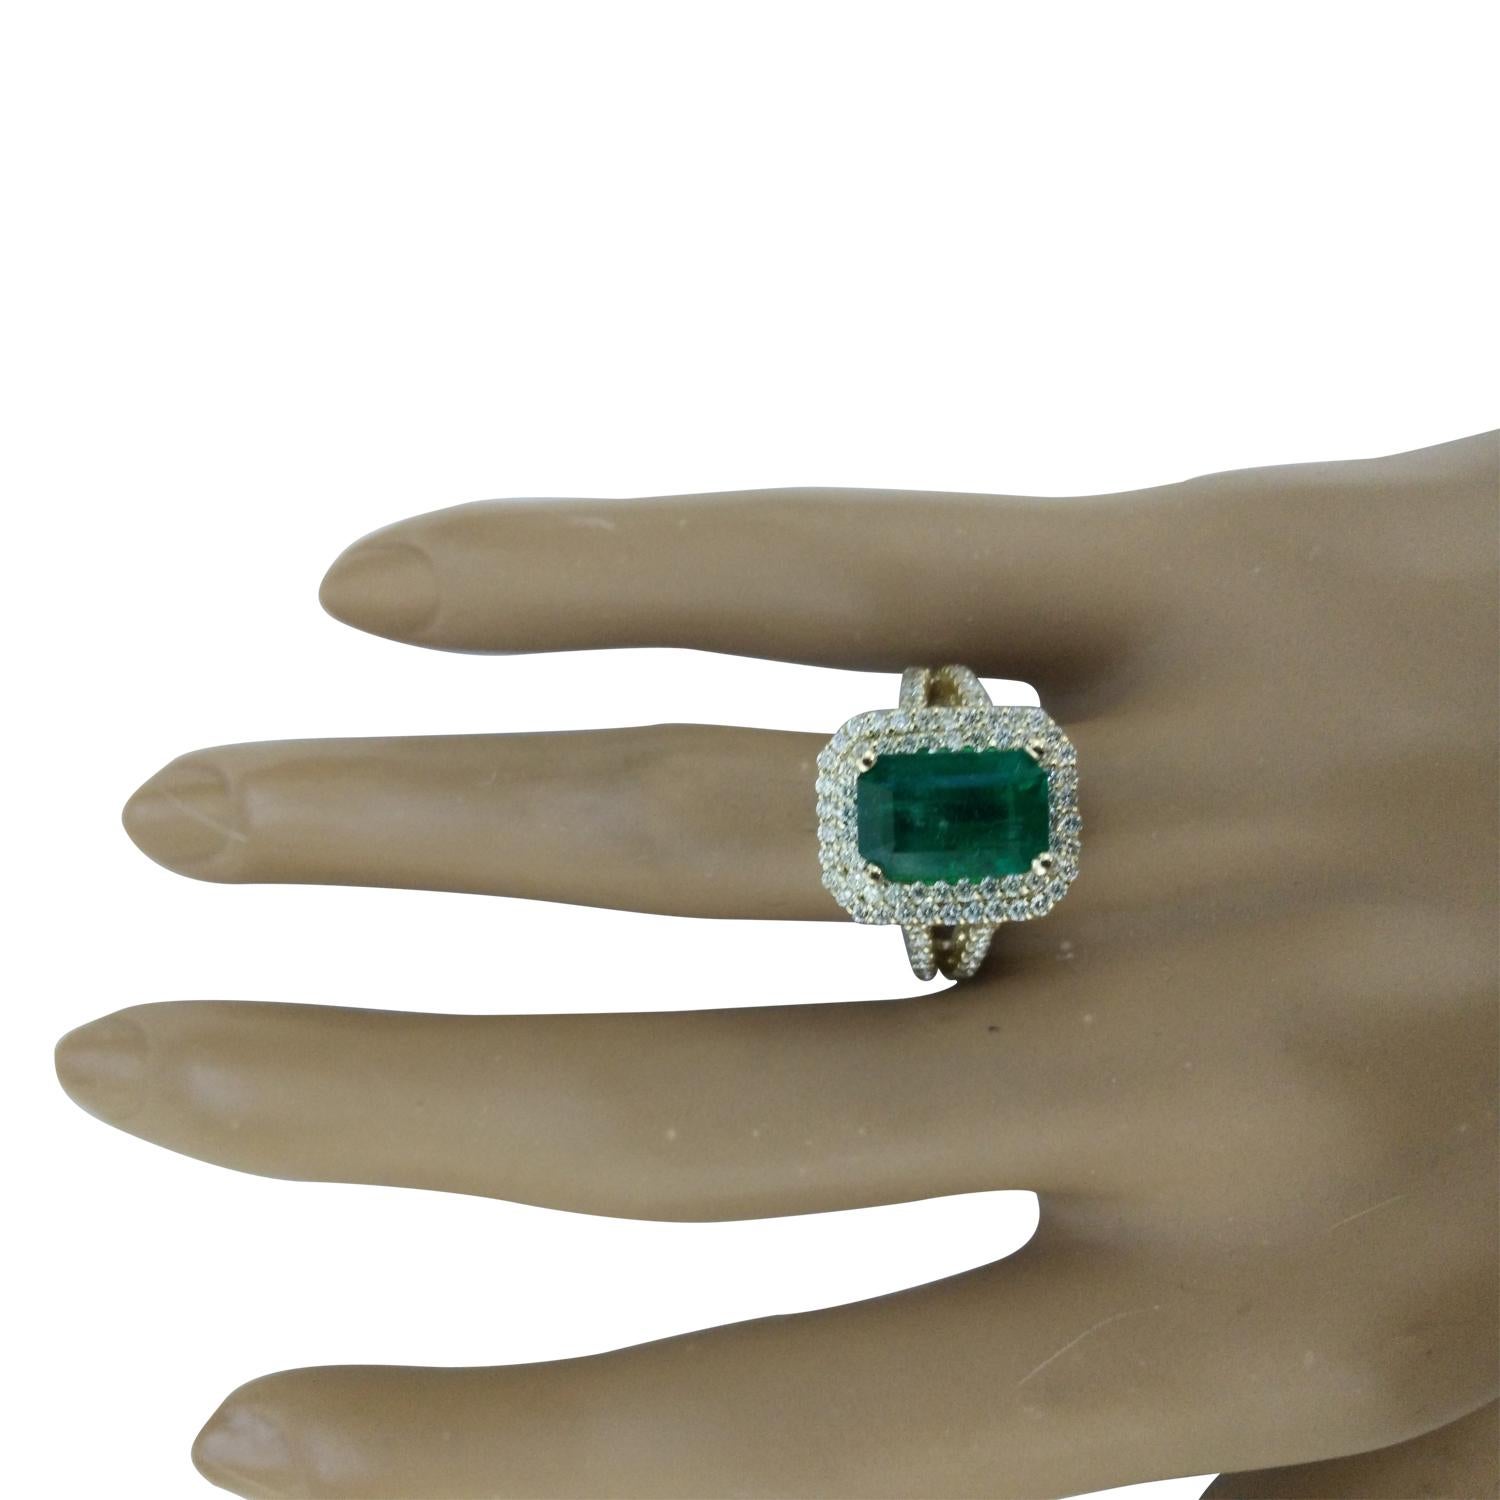 4.42 Carat Natural Emerald 14 Karat Solid Yellow Gold Diamond Ring
Stamped: 14K 
Total Ring Weight: 7.1 Grams
Emerald Weight: 3.42 Carat (11.00x9.00 Millimeters)  
Diamond Weight: 1.00 Carat (F-G Color, VS2-SI1 Clarity )
Diamond Quantity: 93
Face